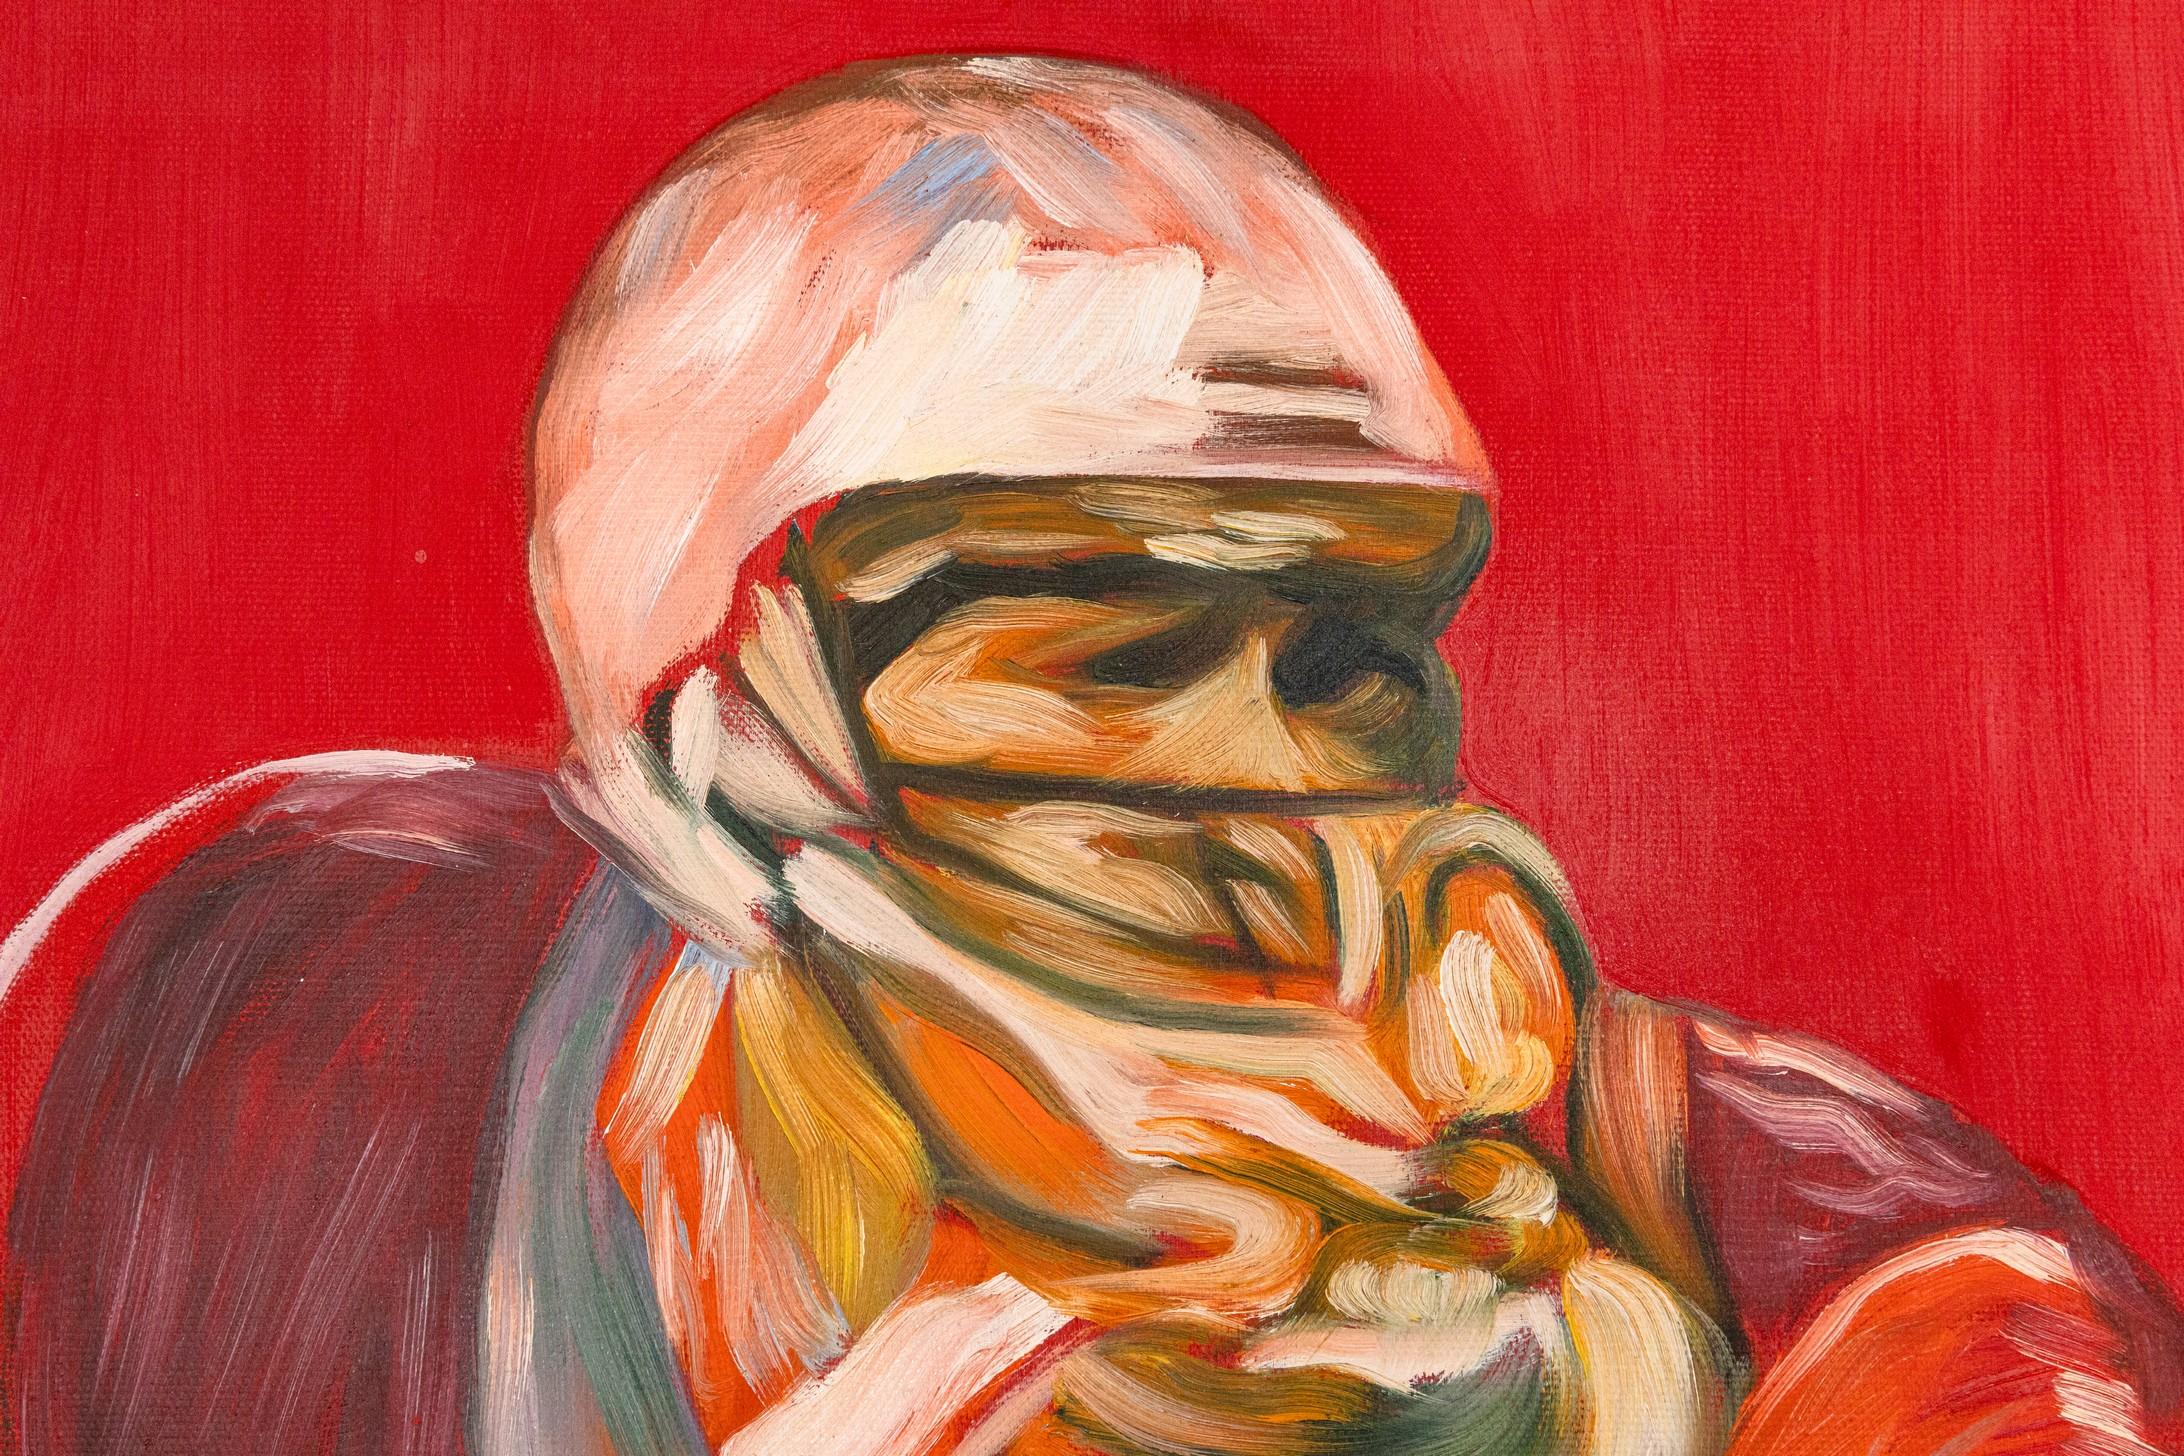 A vividly executed mixed-media acrylic painting on canvas portrays the intensity of an American football player in the midst of the game's pivotal moment is “1st Down” by Dominic Pangborn. The athlete's form, abstracted and charged with movement,